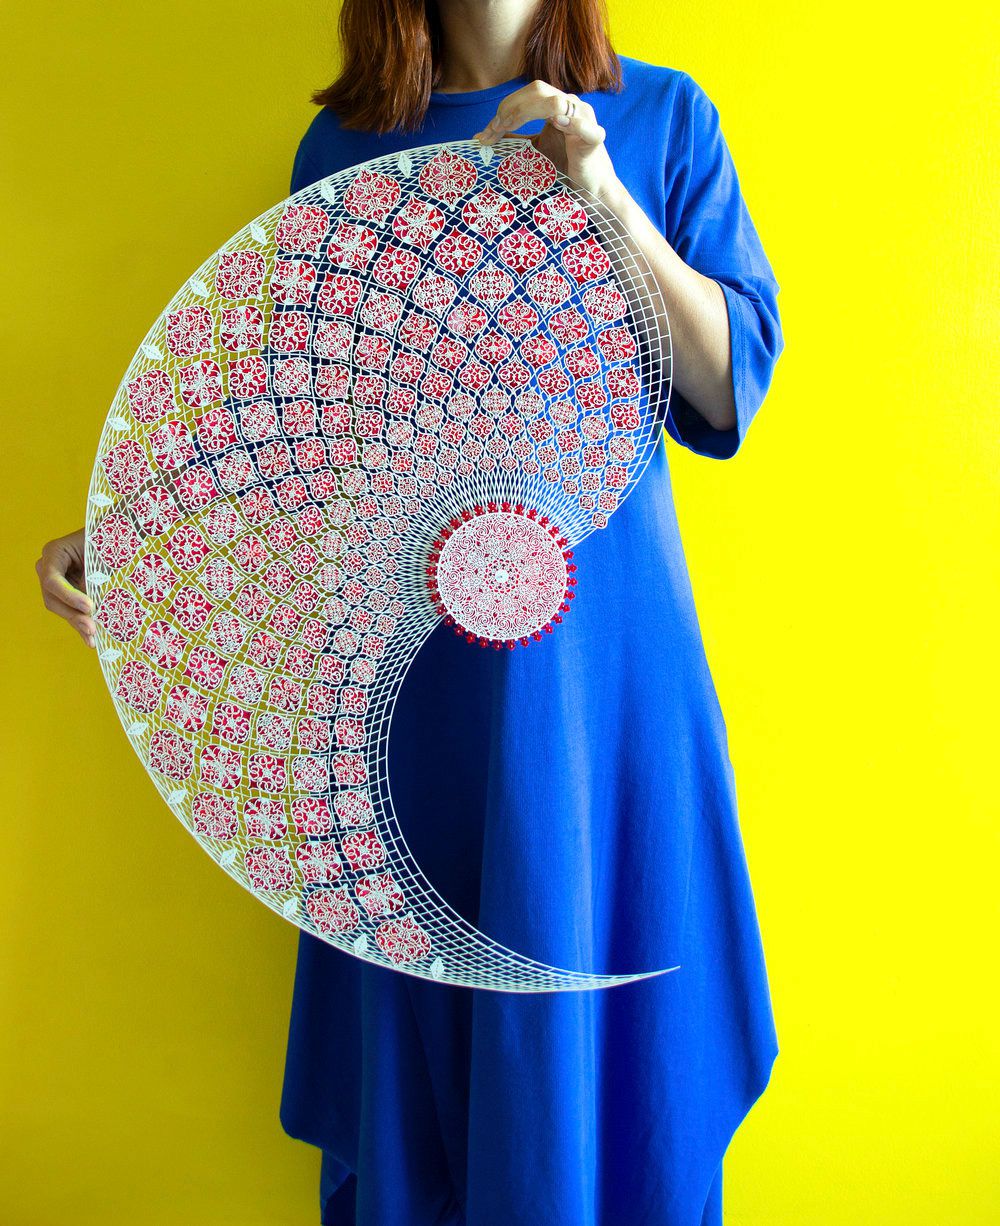 Intricate And Colorful Arabesque Made Of Laser Cut Paper Julia Ibbini 15